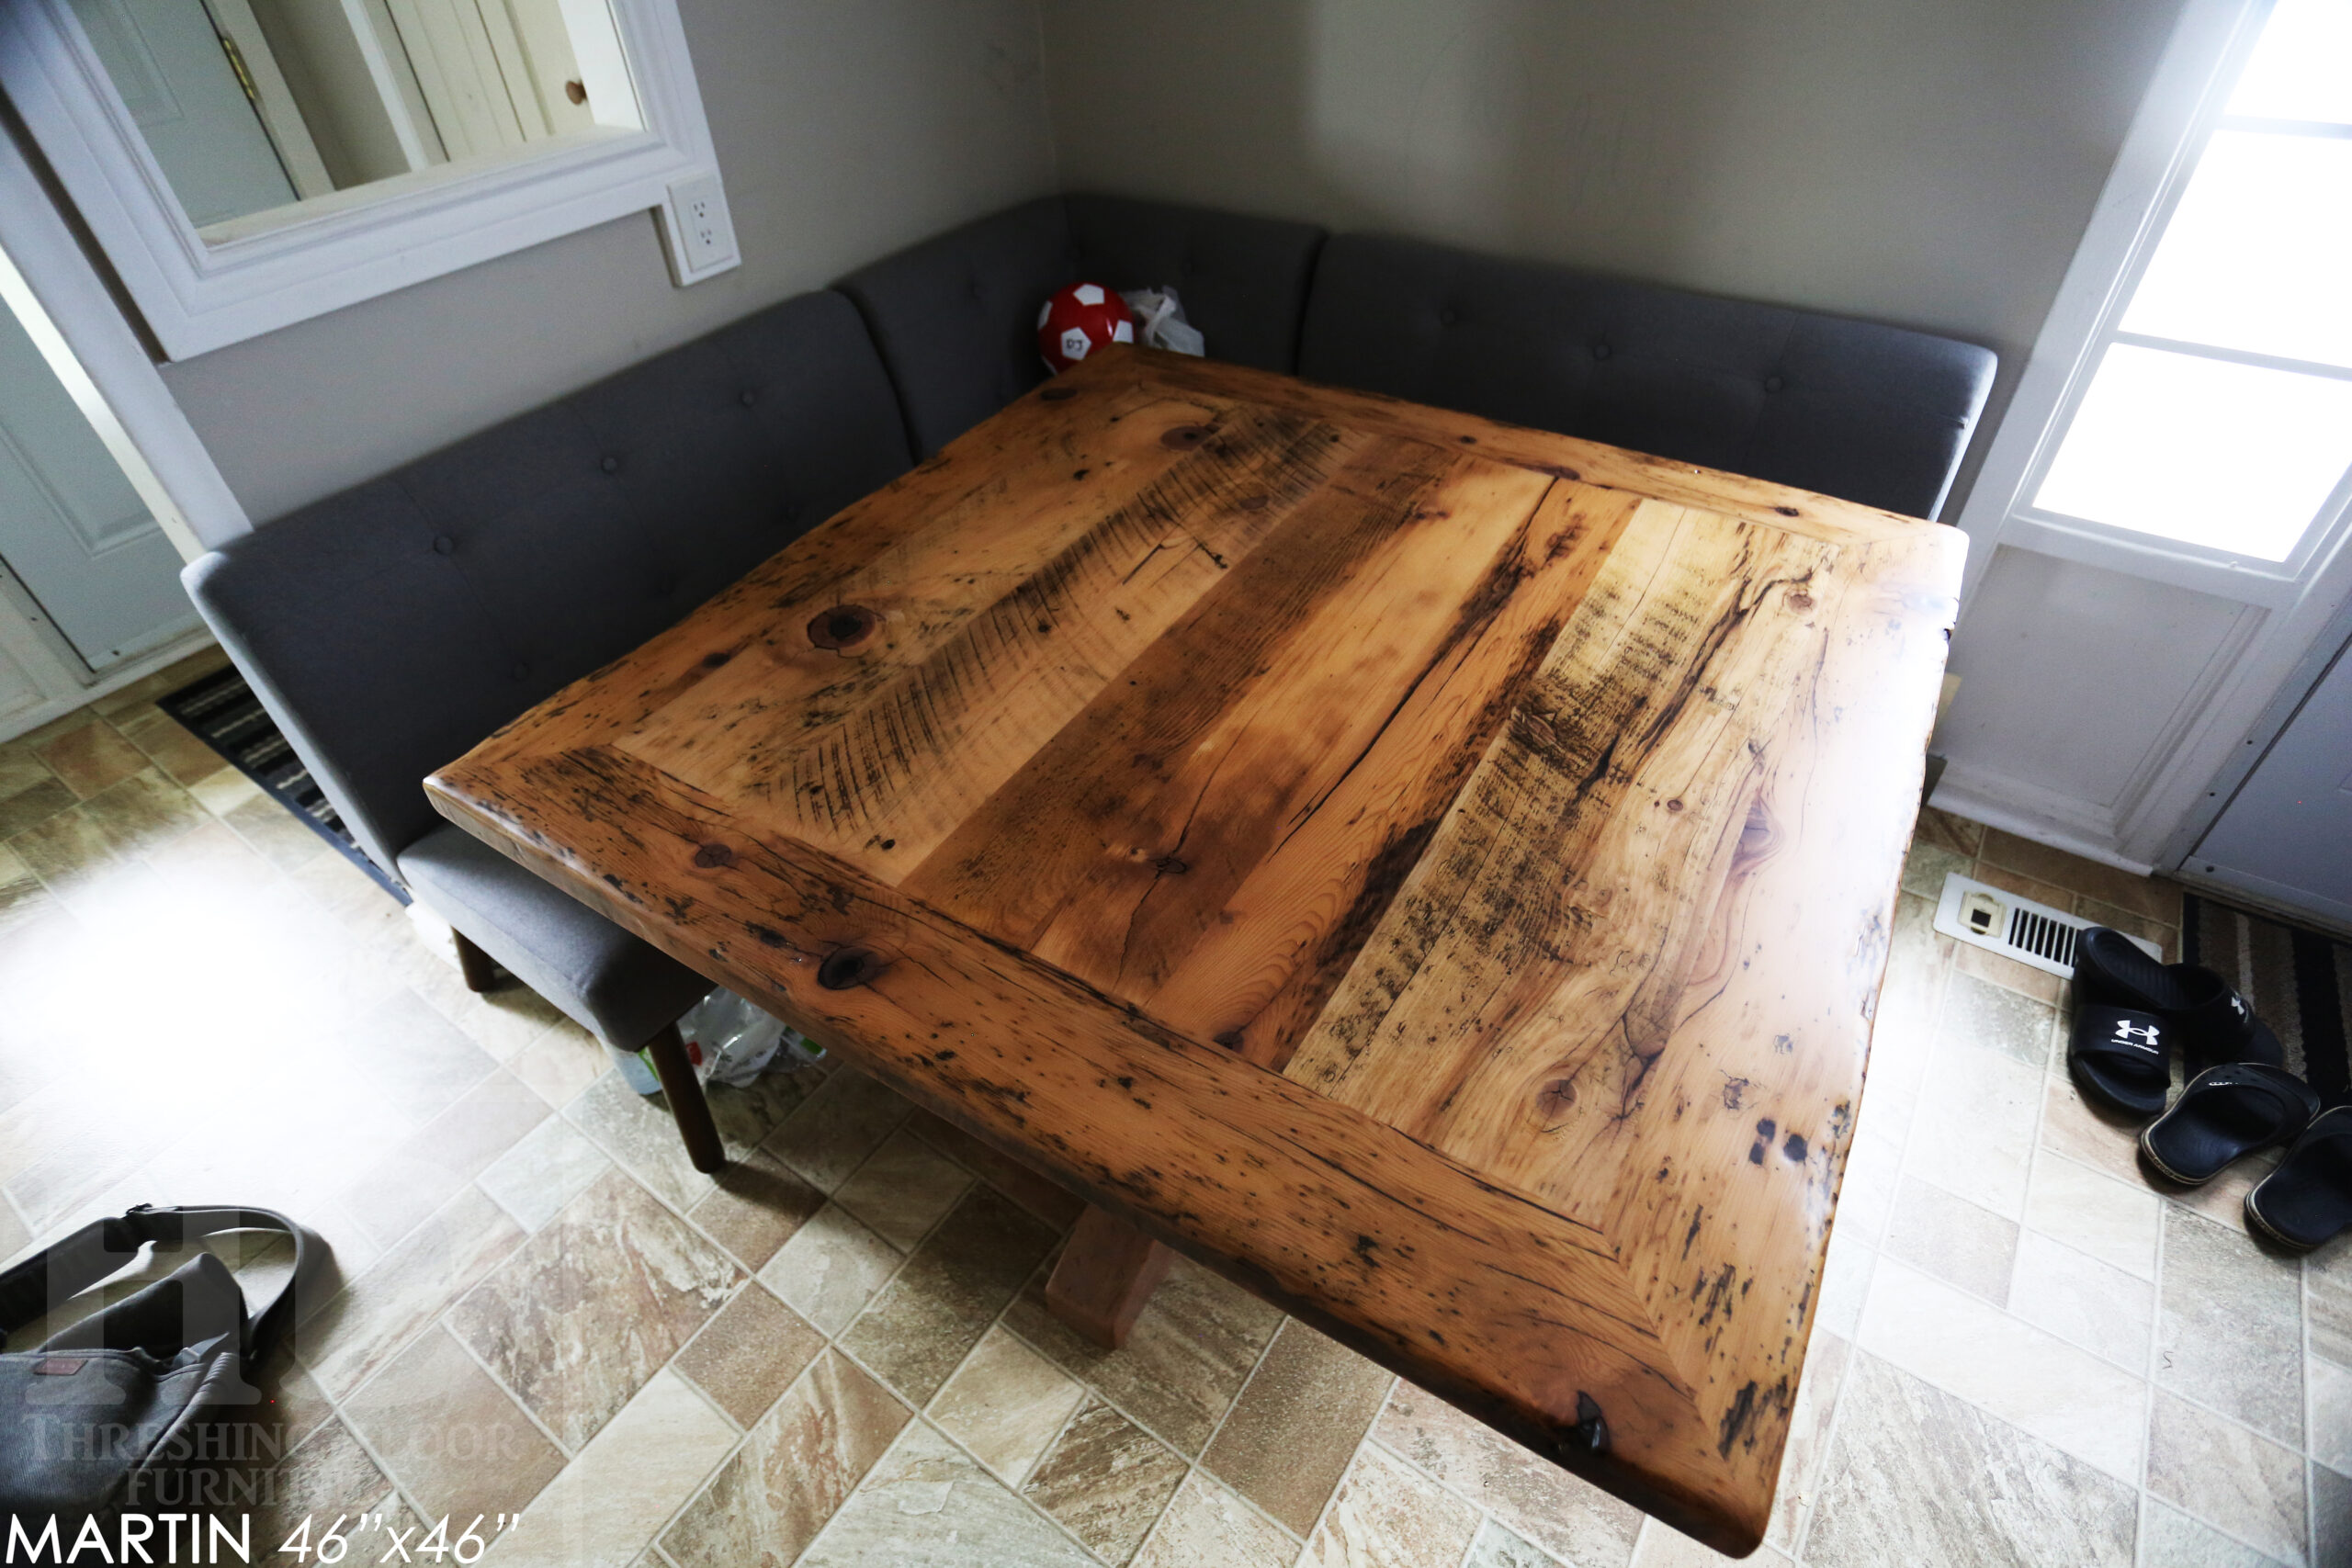 48" x 48" Reclaimed Wood Sqaure Table we made for a Burlington home - 28" height - Mitred Corners - Hand-Hewn Beam Pedestals Base - Original edges & distressing maintained - Hemlock Threshing Floor Construction - Greytone Treatment Option to maintain the light colour of unfinished - www.table.ca